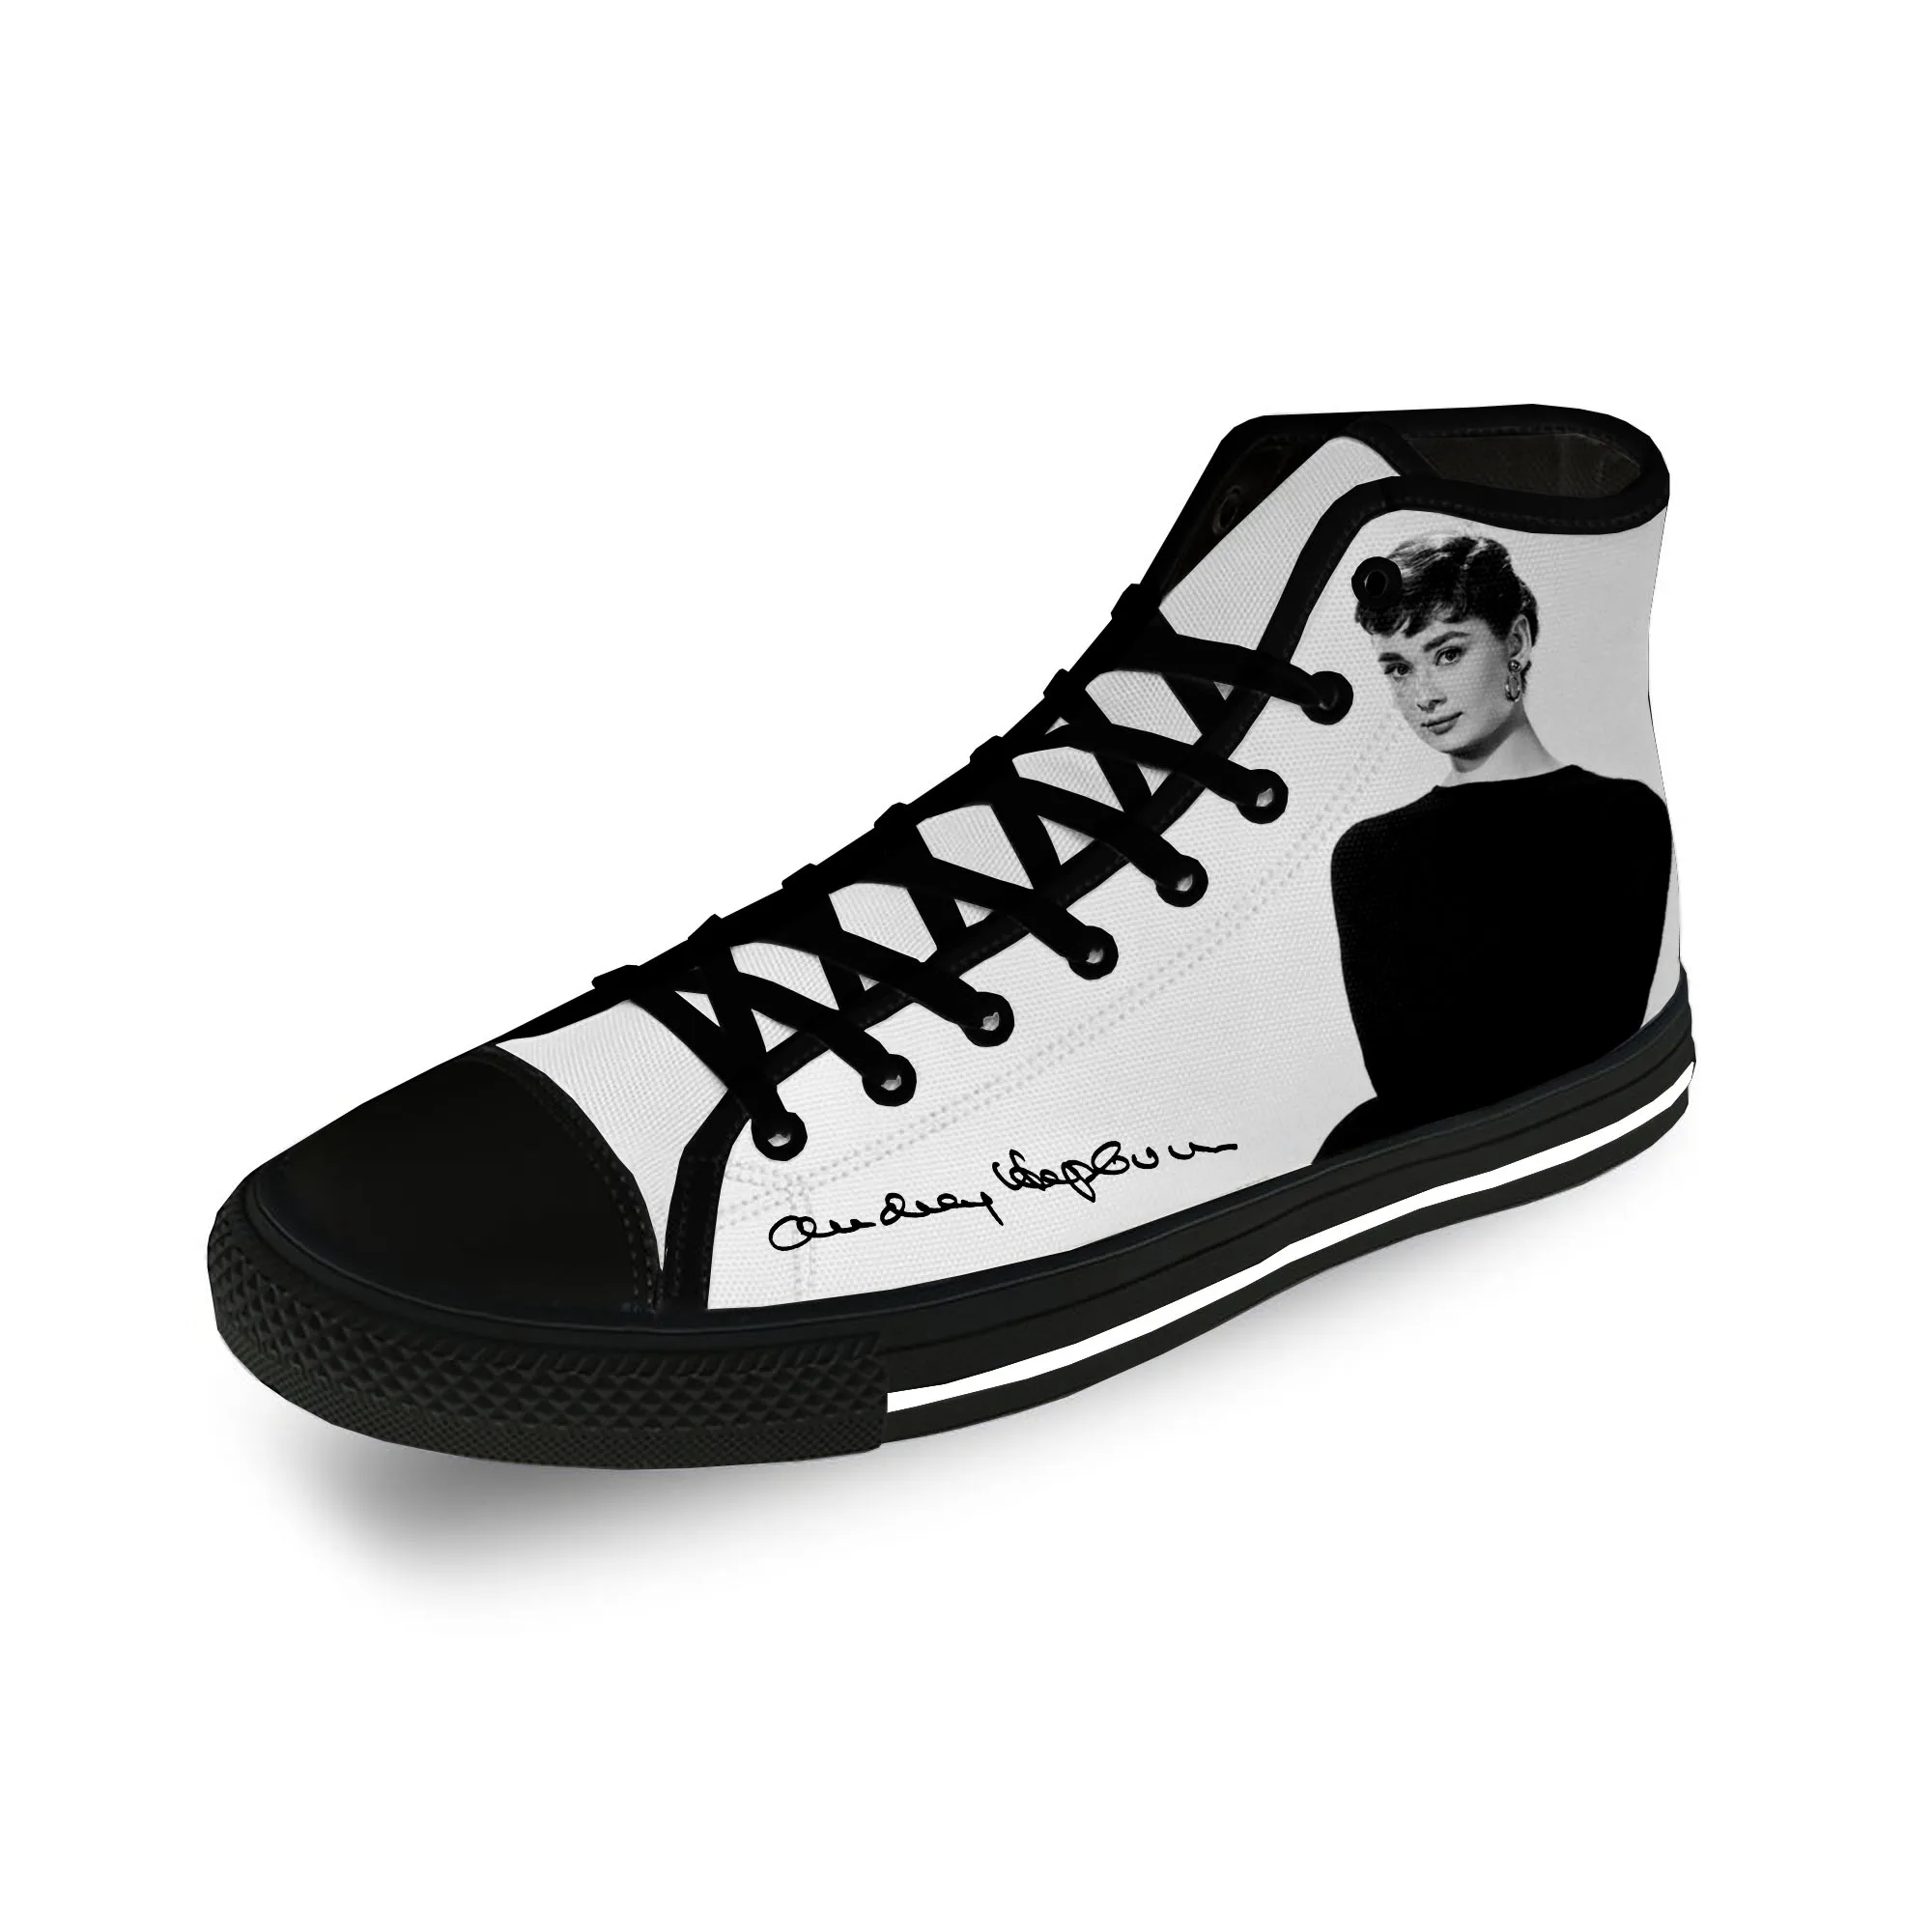 

Movie Star Audrey Hepburn Cute Casual Cloth 3D Print High Top Canvas Fashion Shoes Men Women Lightweight Breathable Sneakers